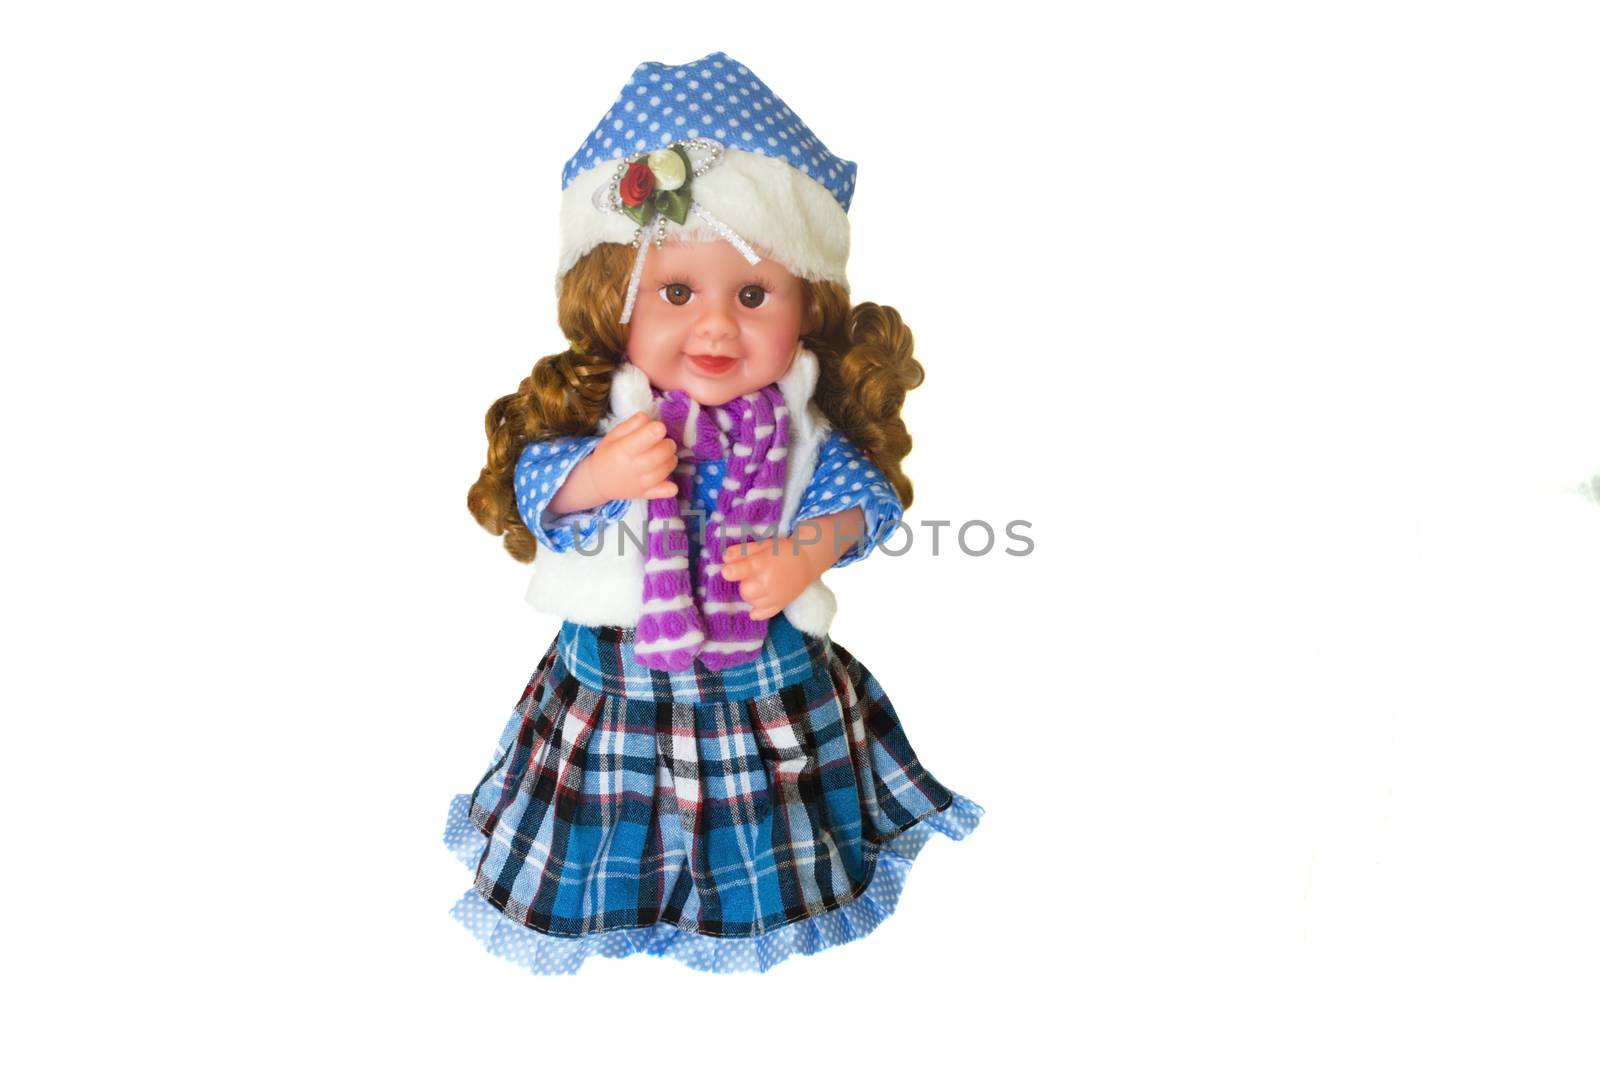 The doll in a beautiful dress, cap , with long hair